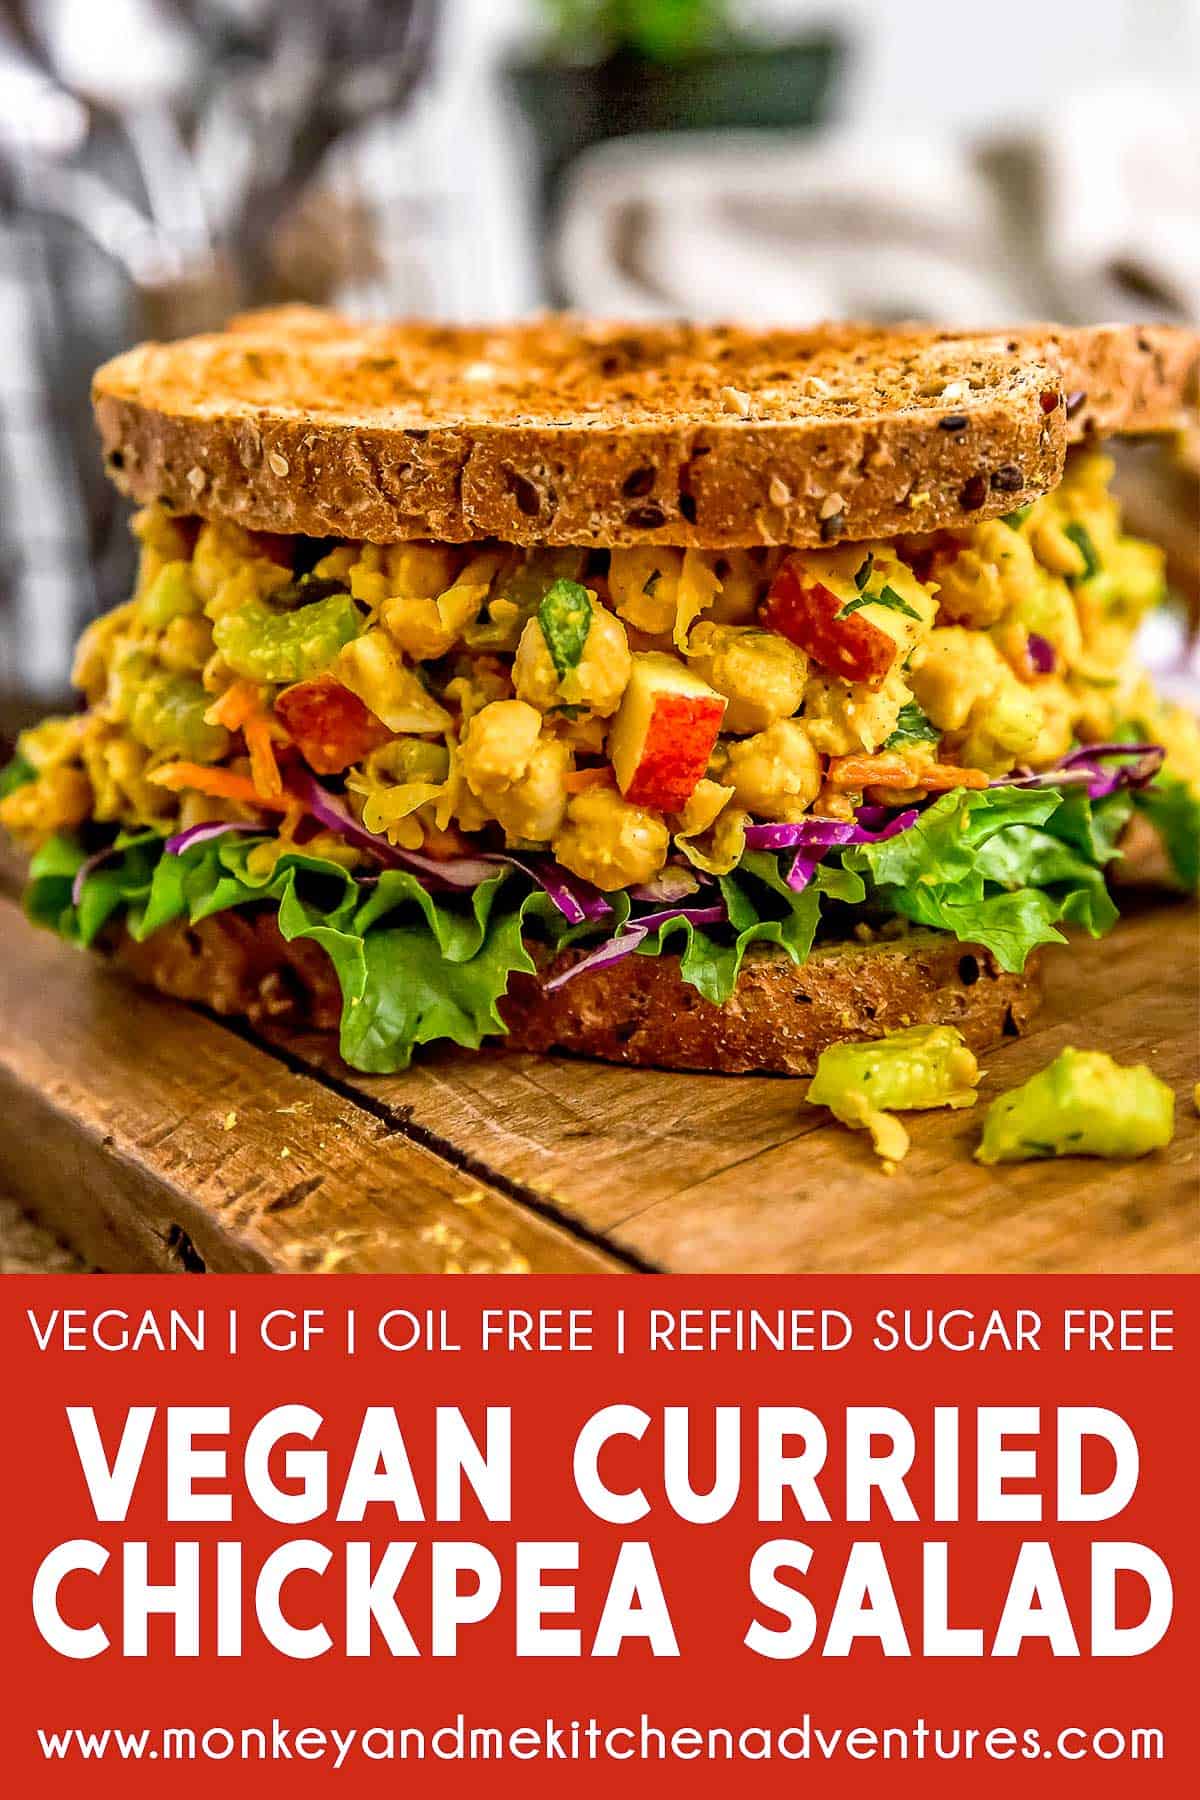 Vegan Curried Chickpea Salad with text description